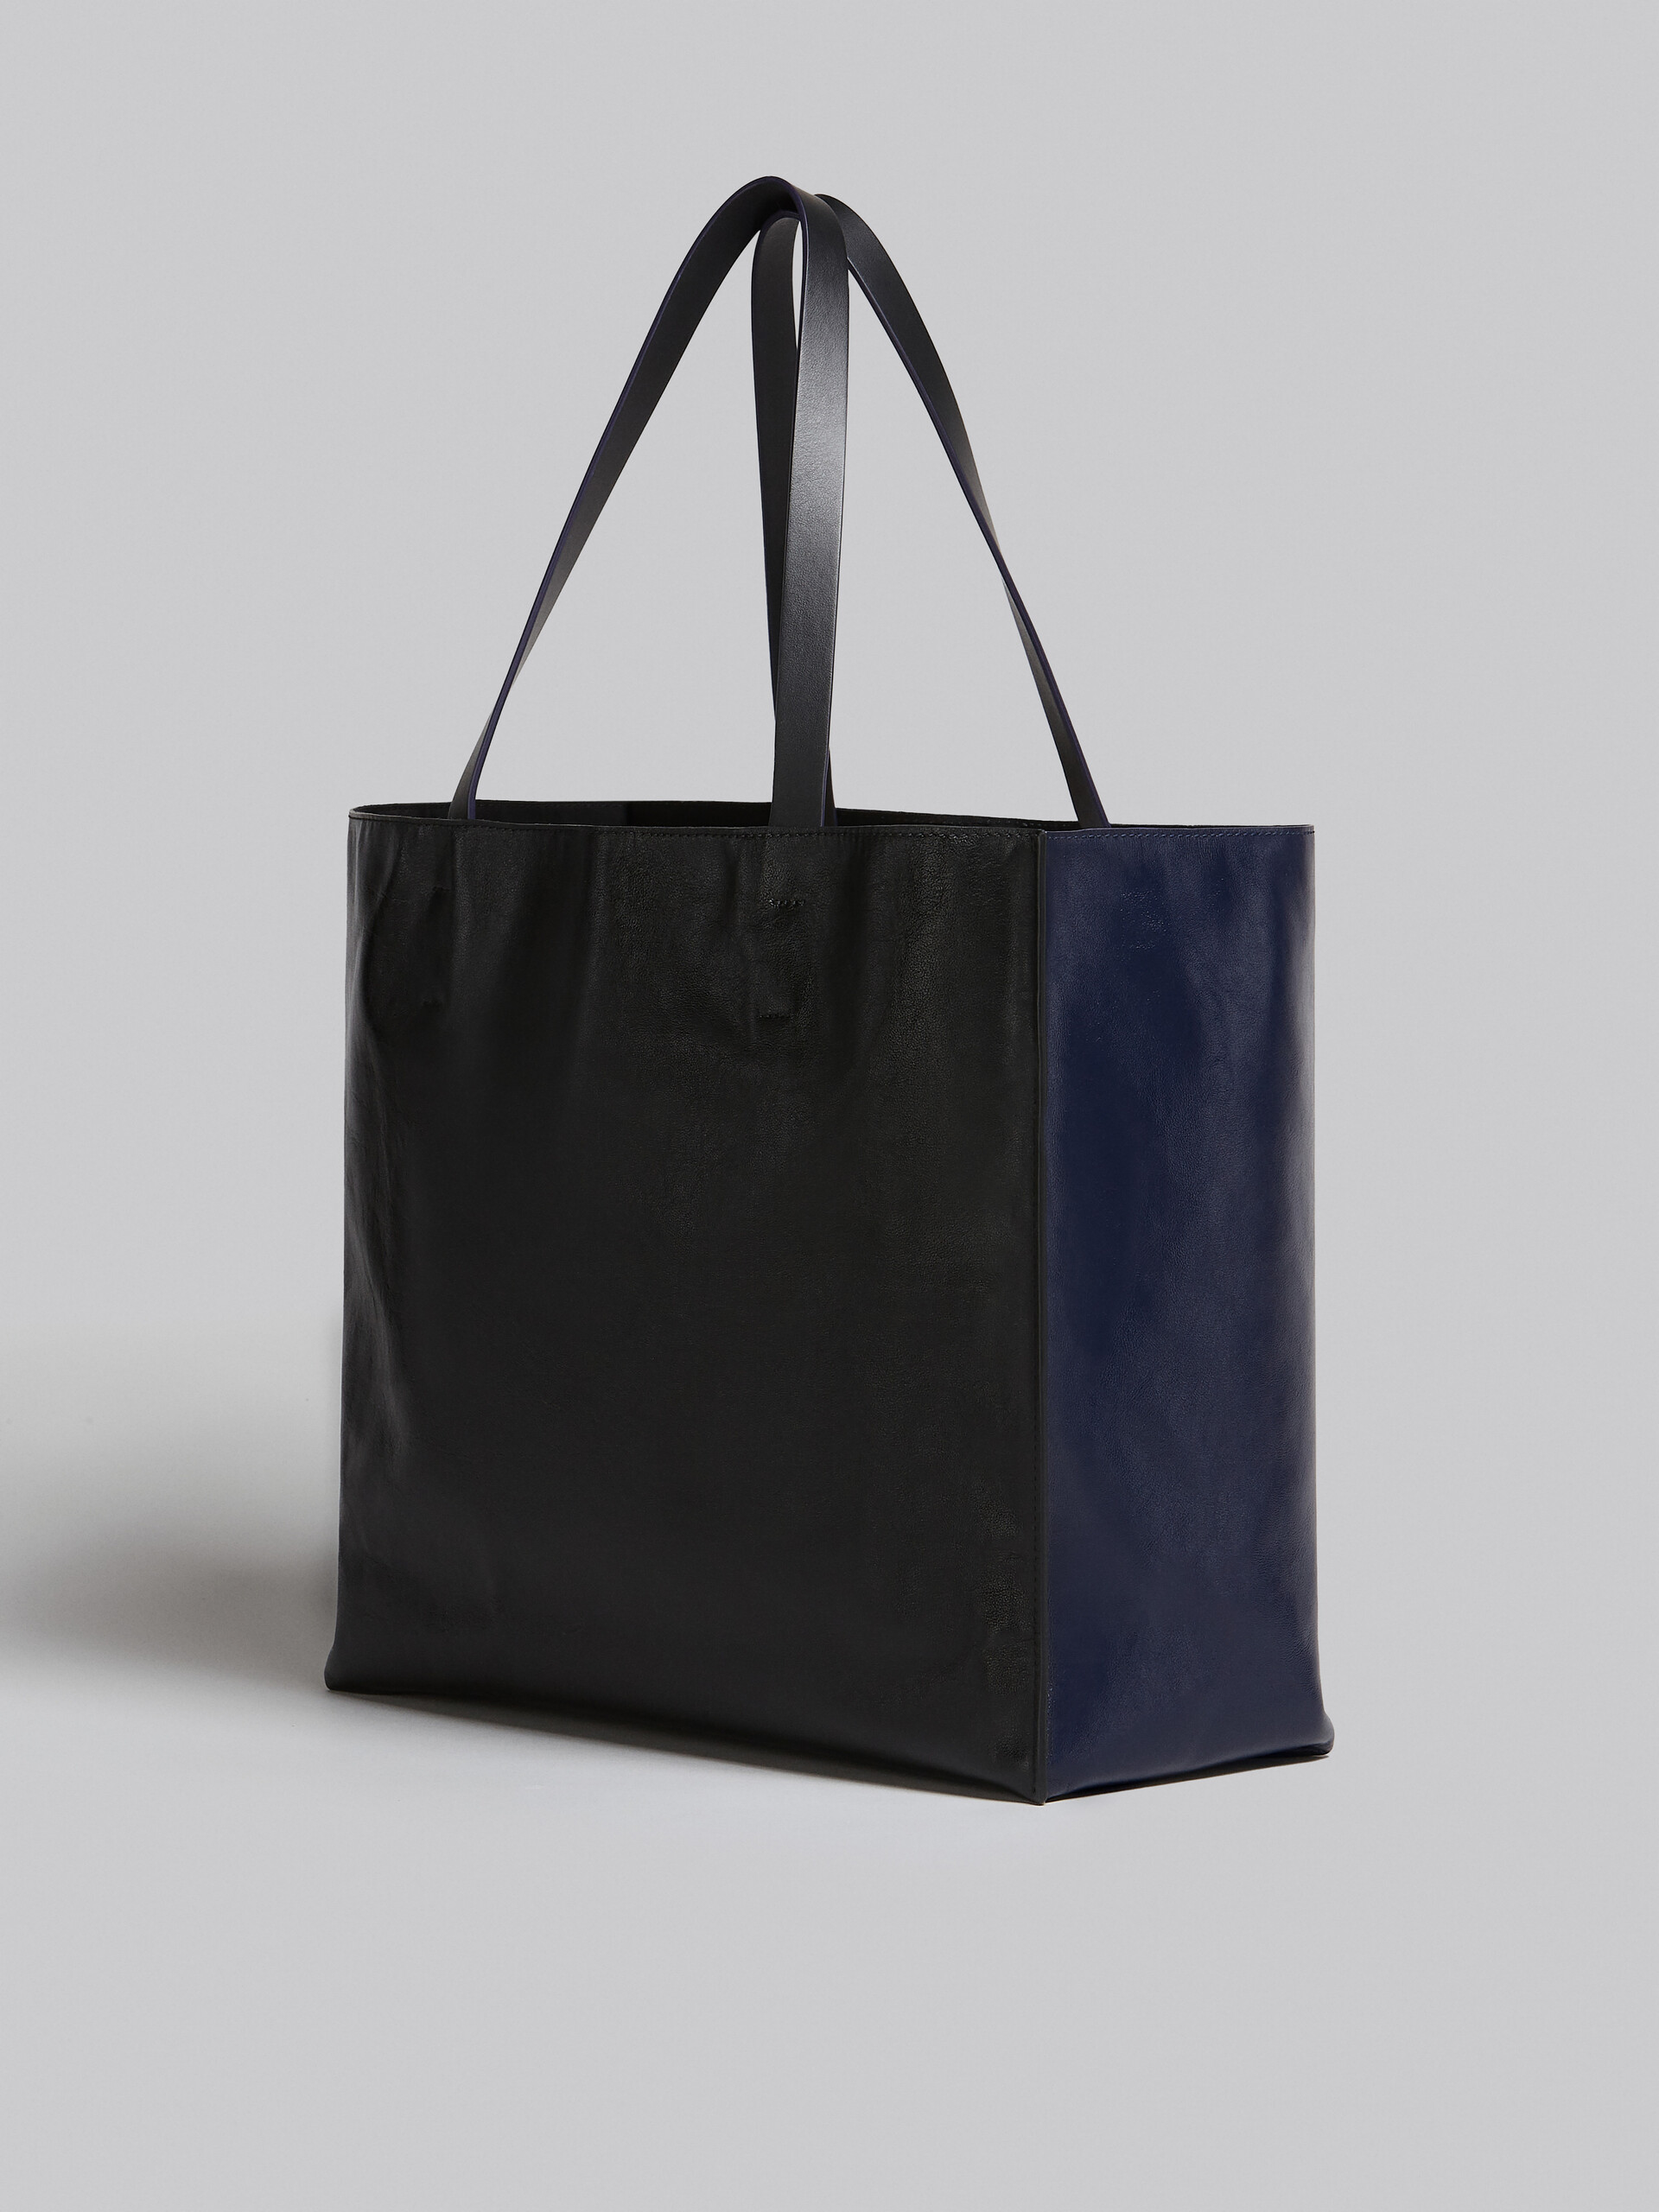 Museo Soft Bag in blue and black leather